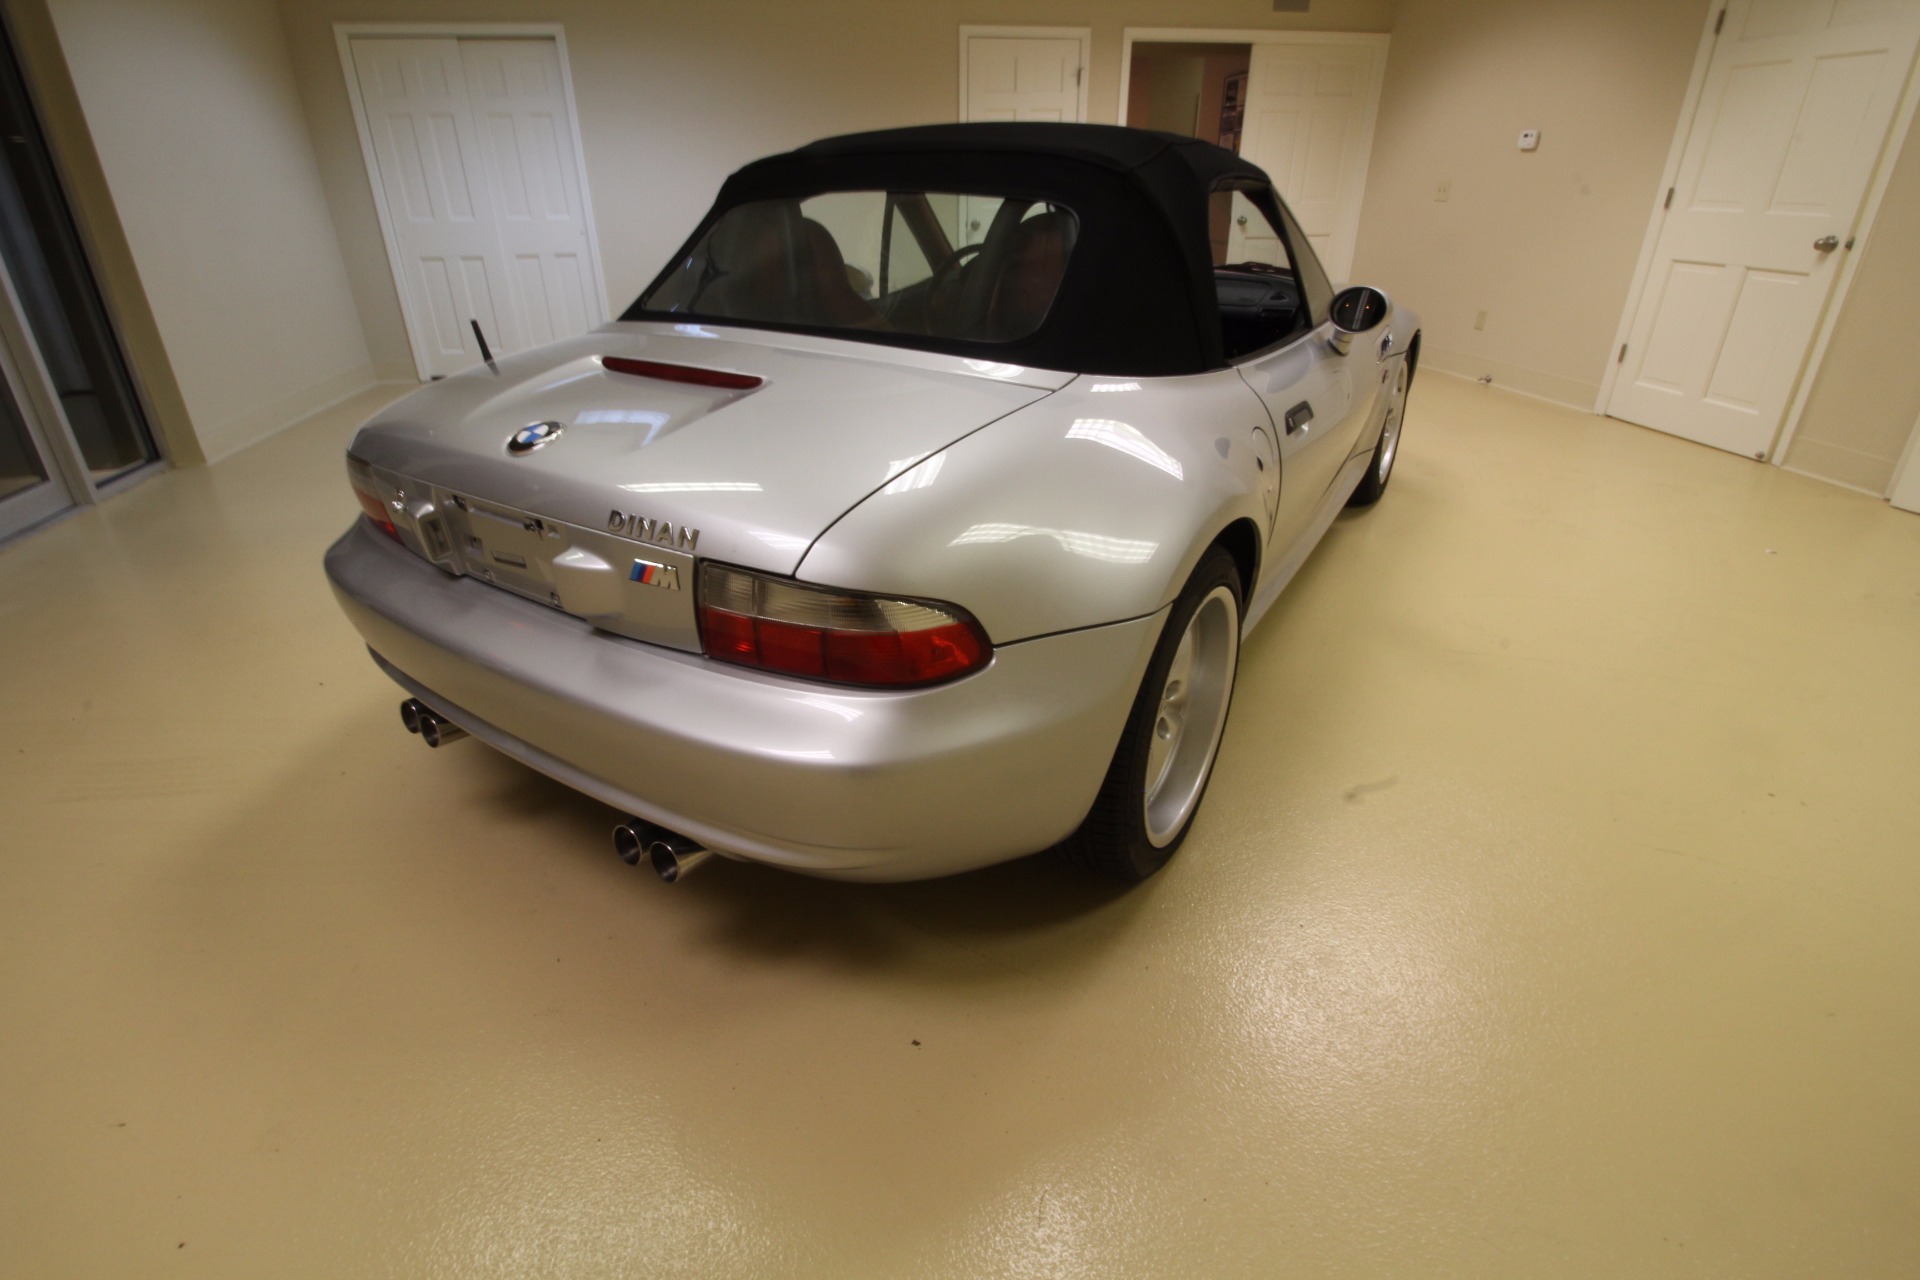 Used 2000 Titanium Silver Metallic with Black Top BMW M Roadster DINAN | Albany, NY